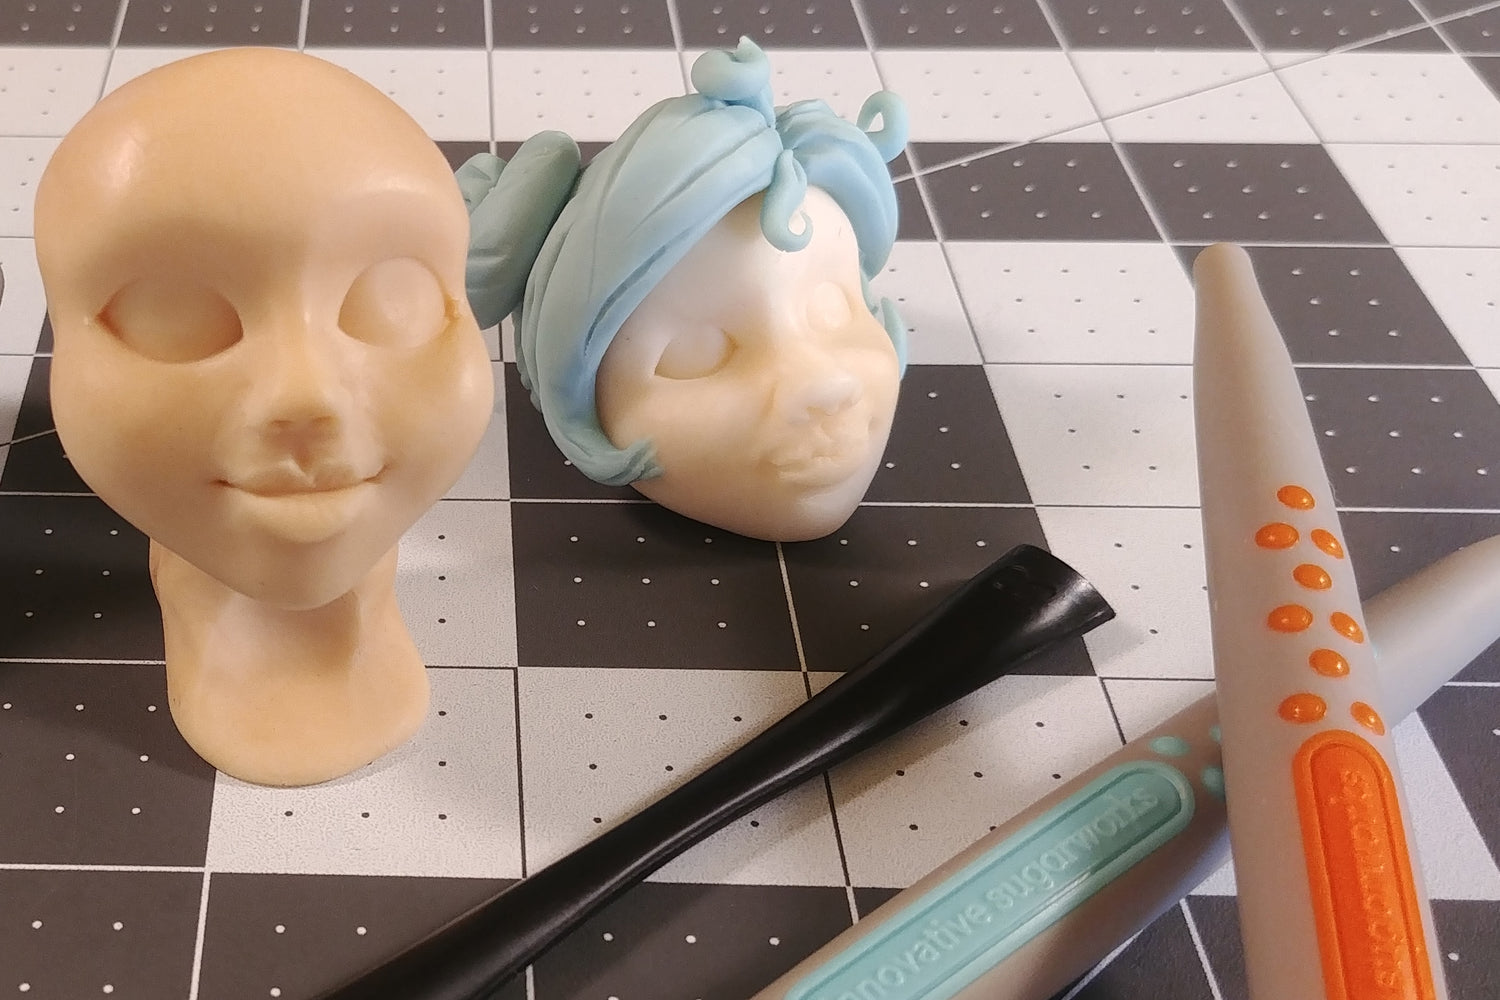 Face Sculpting with Sugar Shapers, TLook, and Jamie Louks